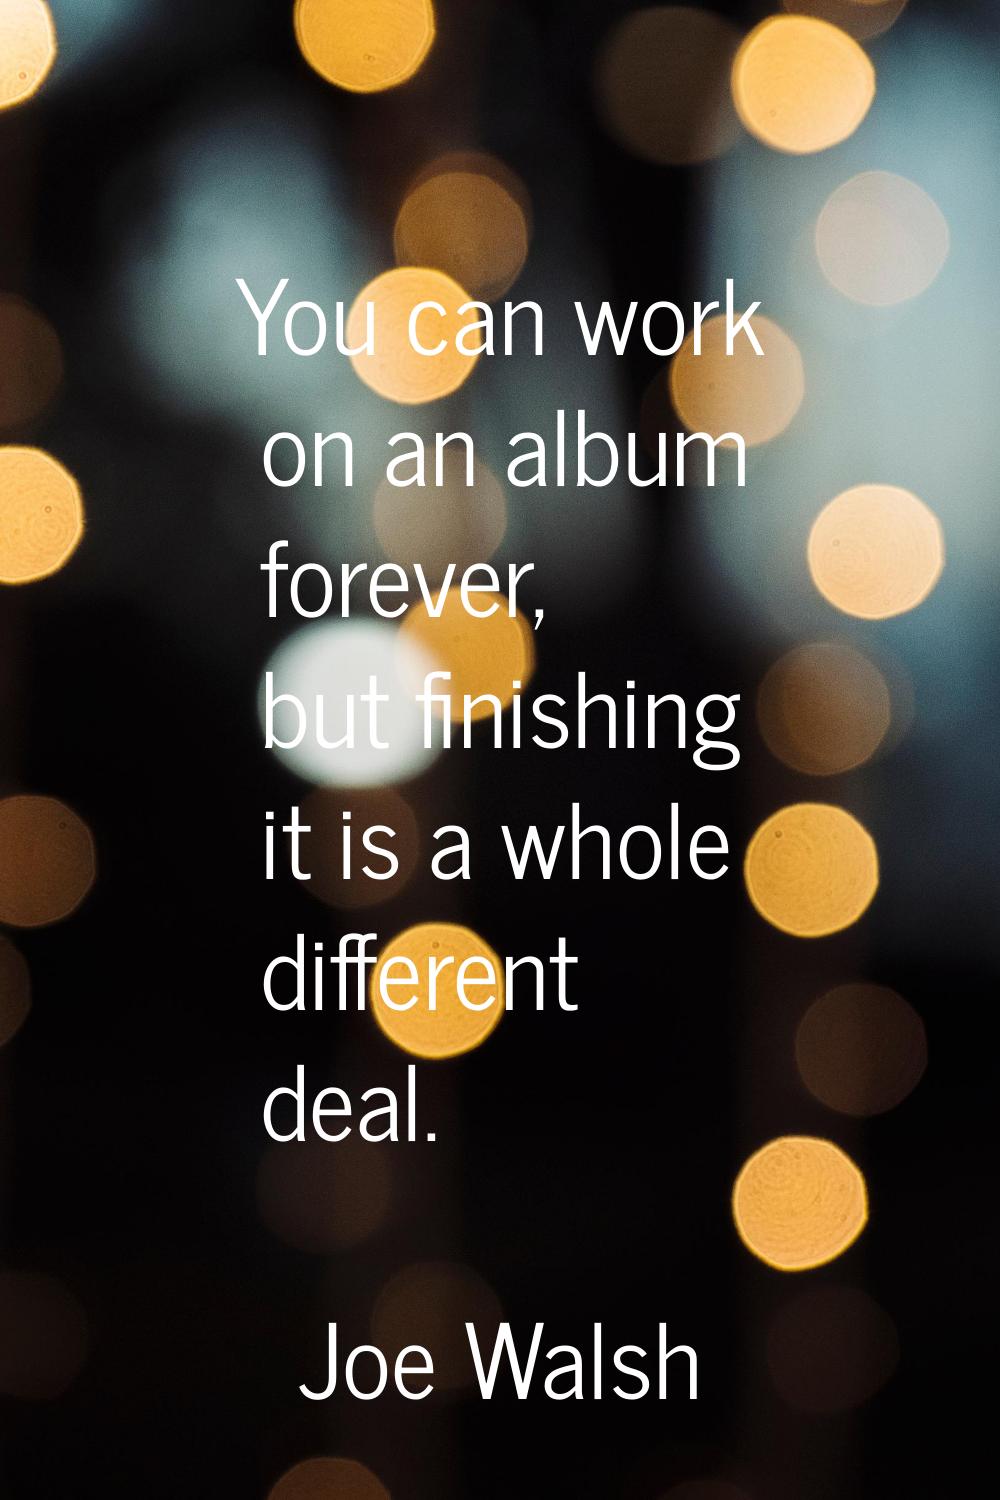 You can work on an album forever, but finishing it is a whole different deal.